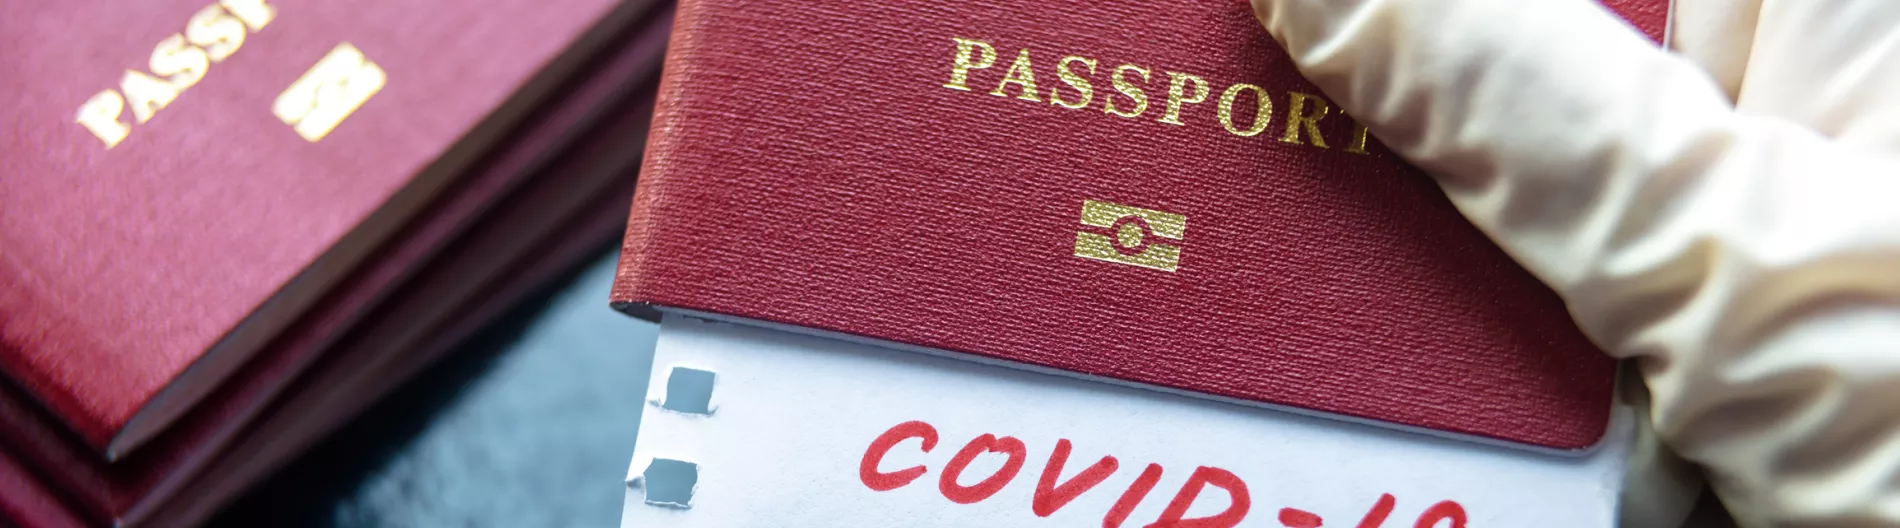 Passports and paper with COVID-19 written in red.